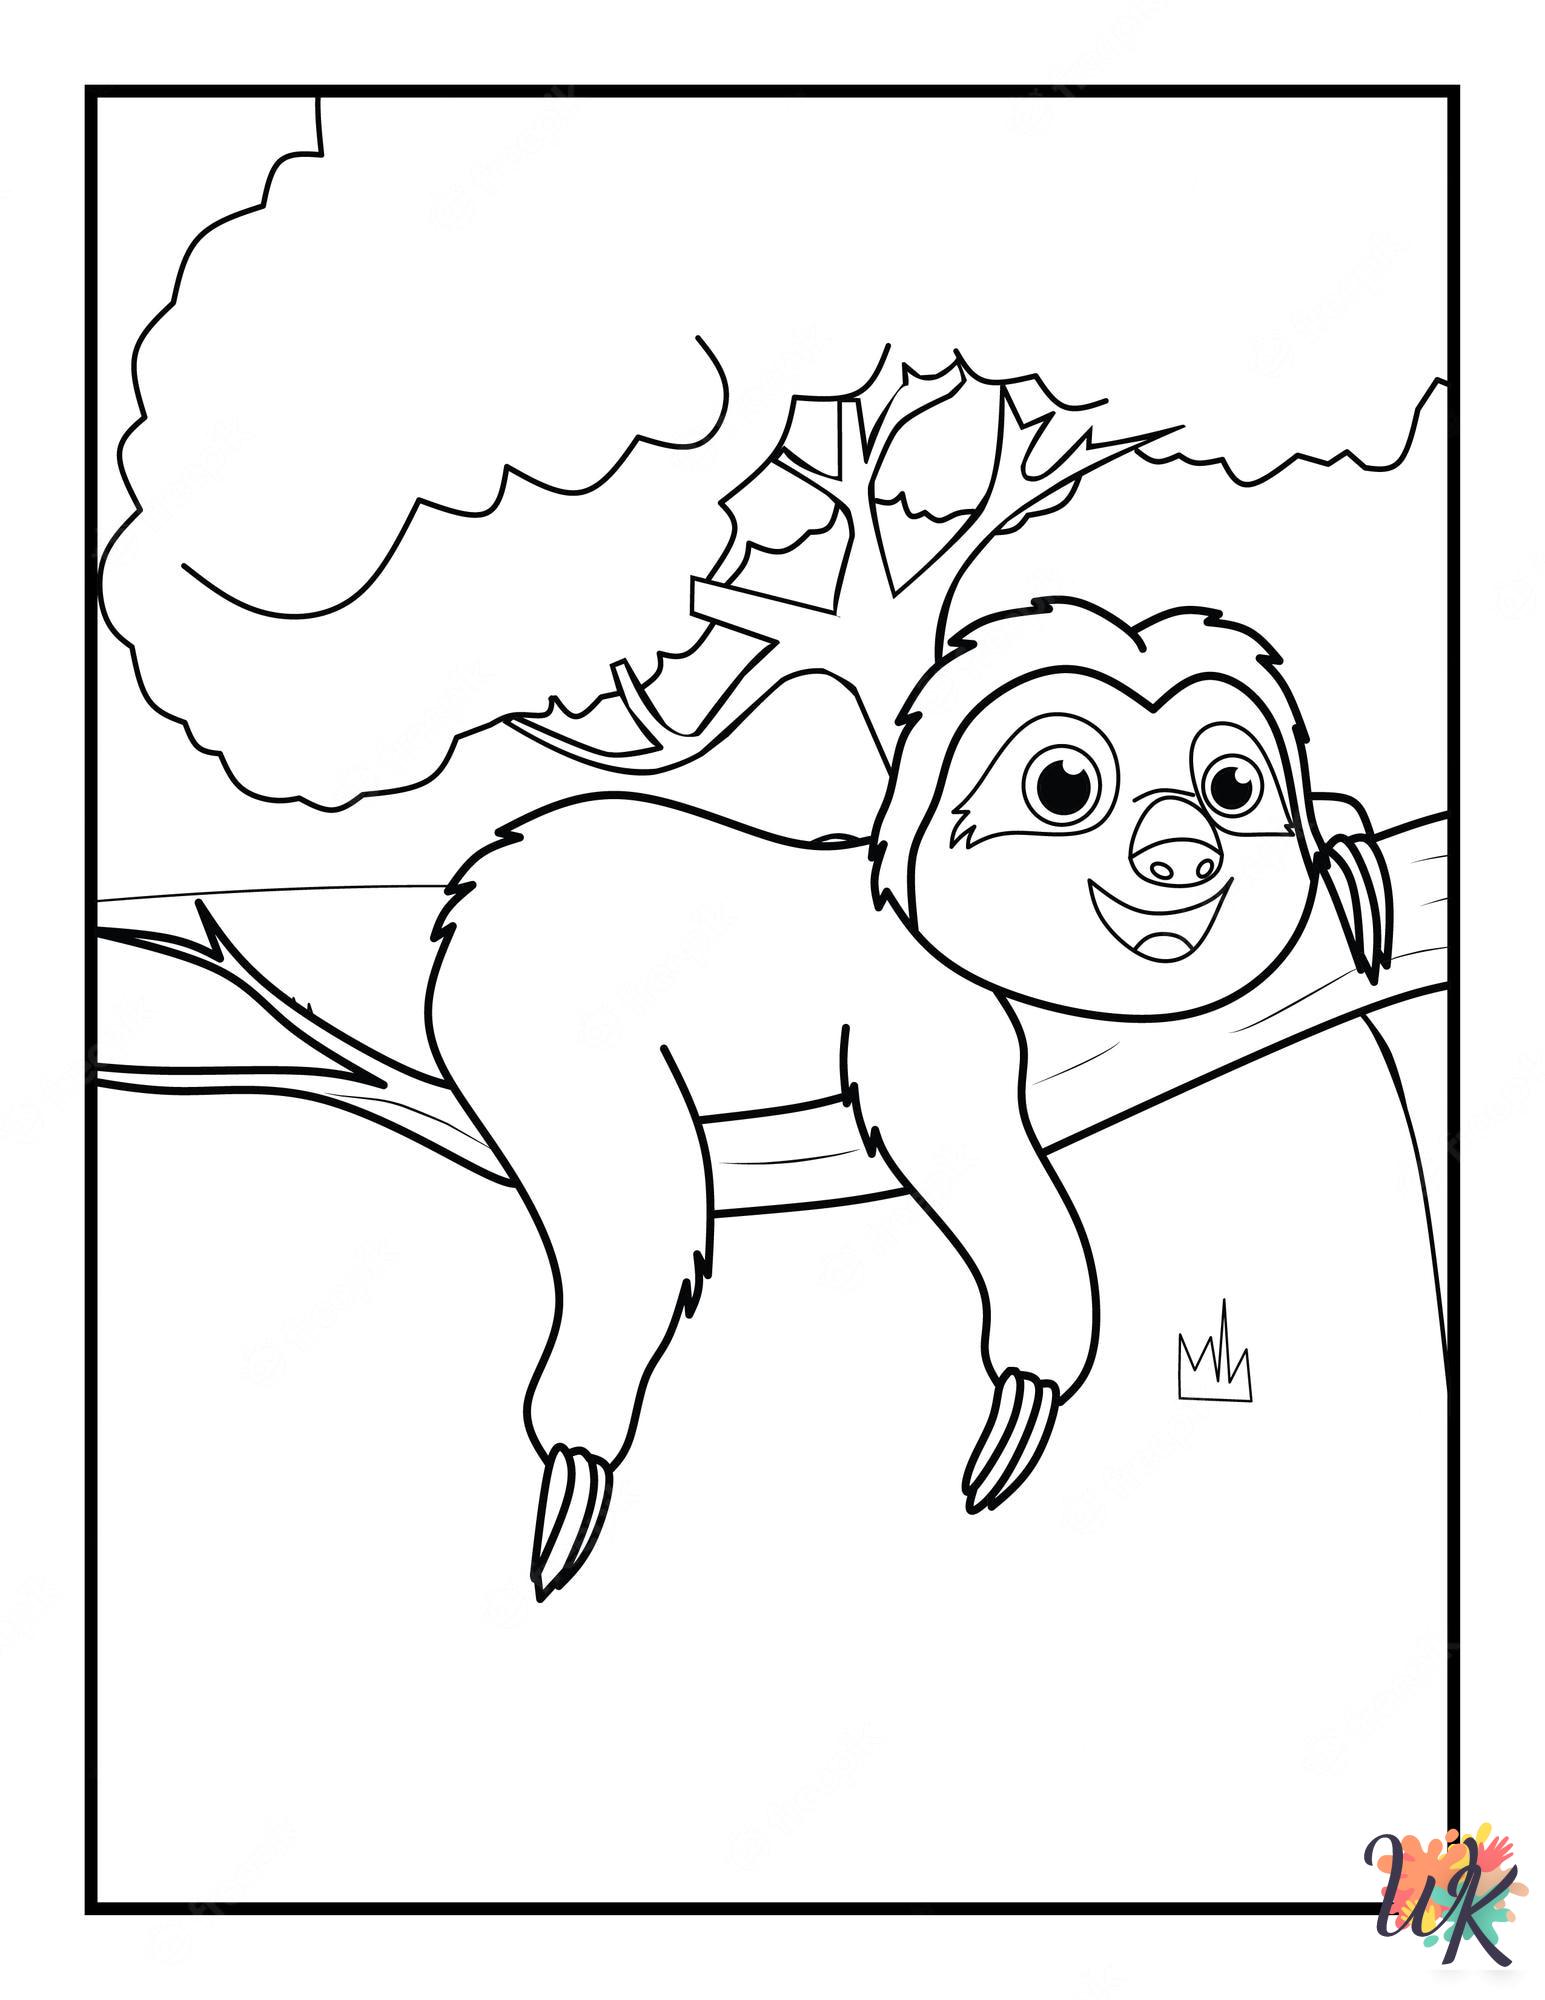 Sloth free coloring pages